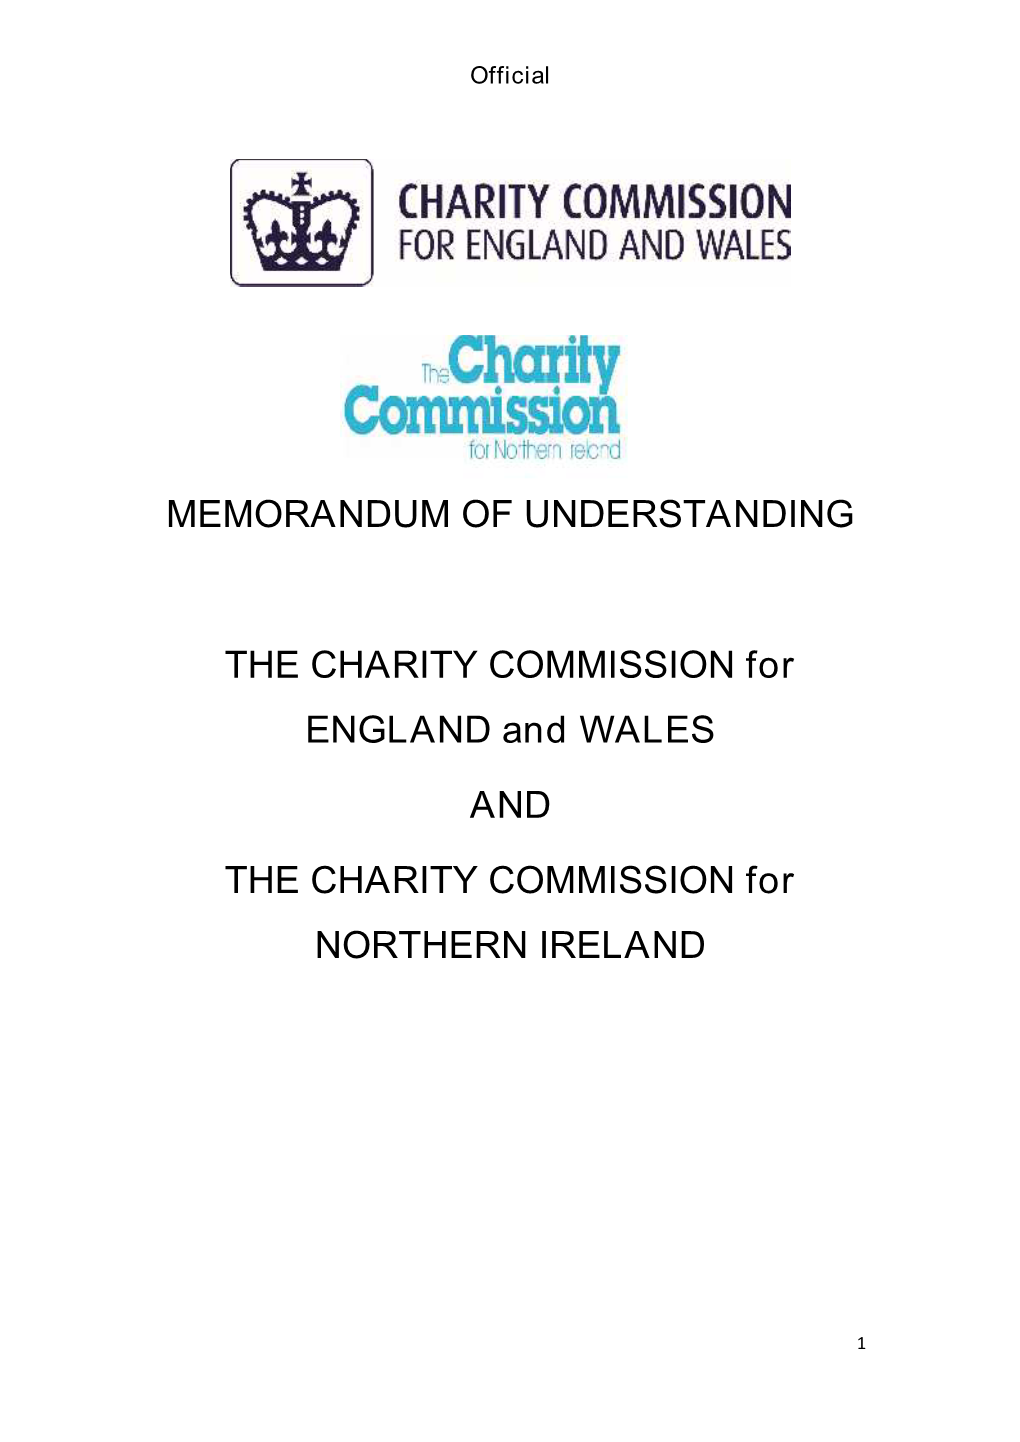 CCEW) and the Charity Commission for Northern Ireland (CCNI